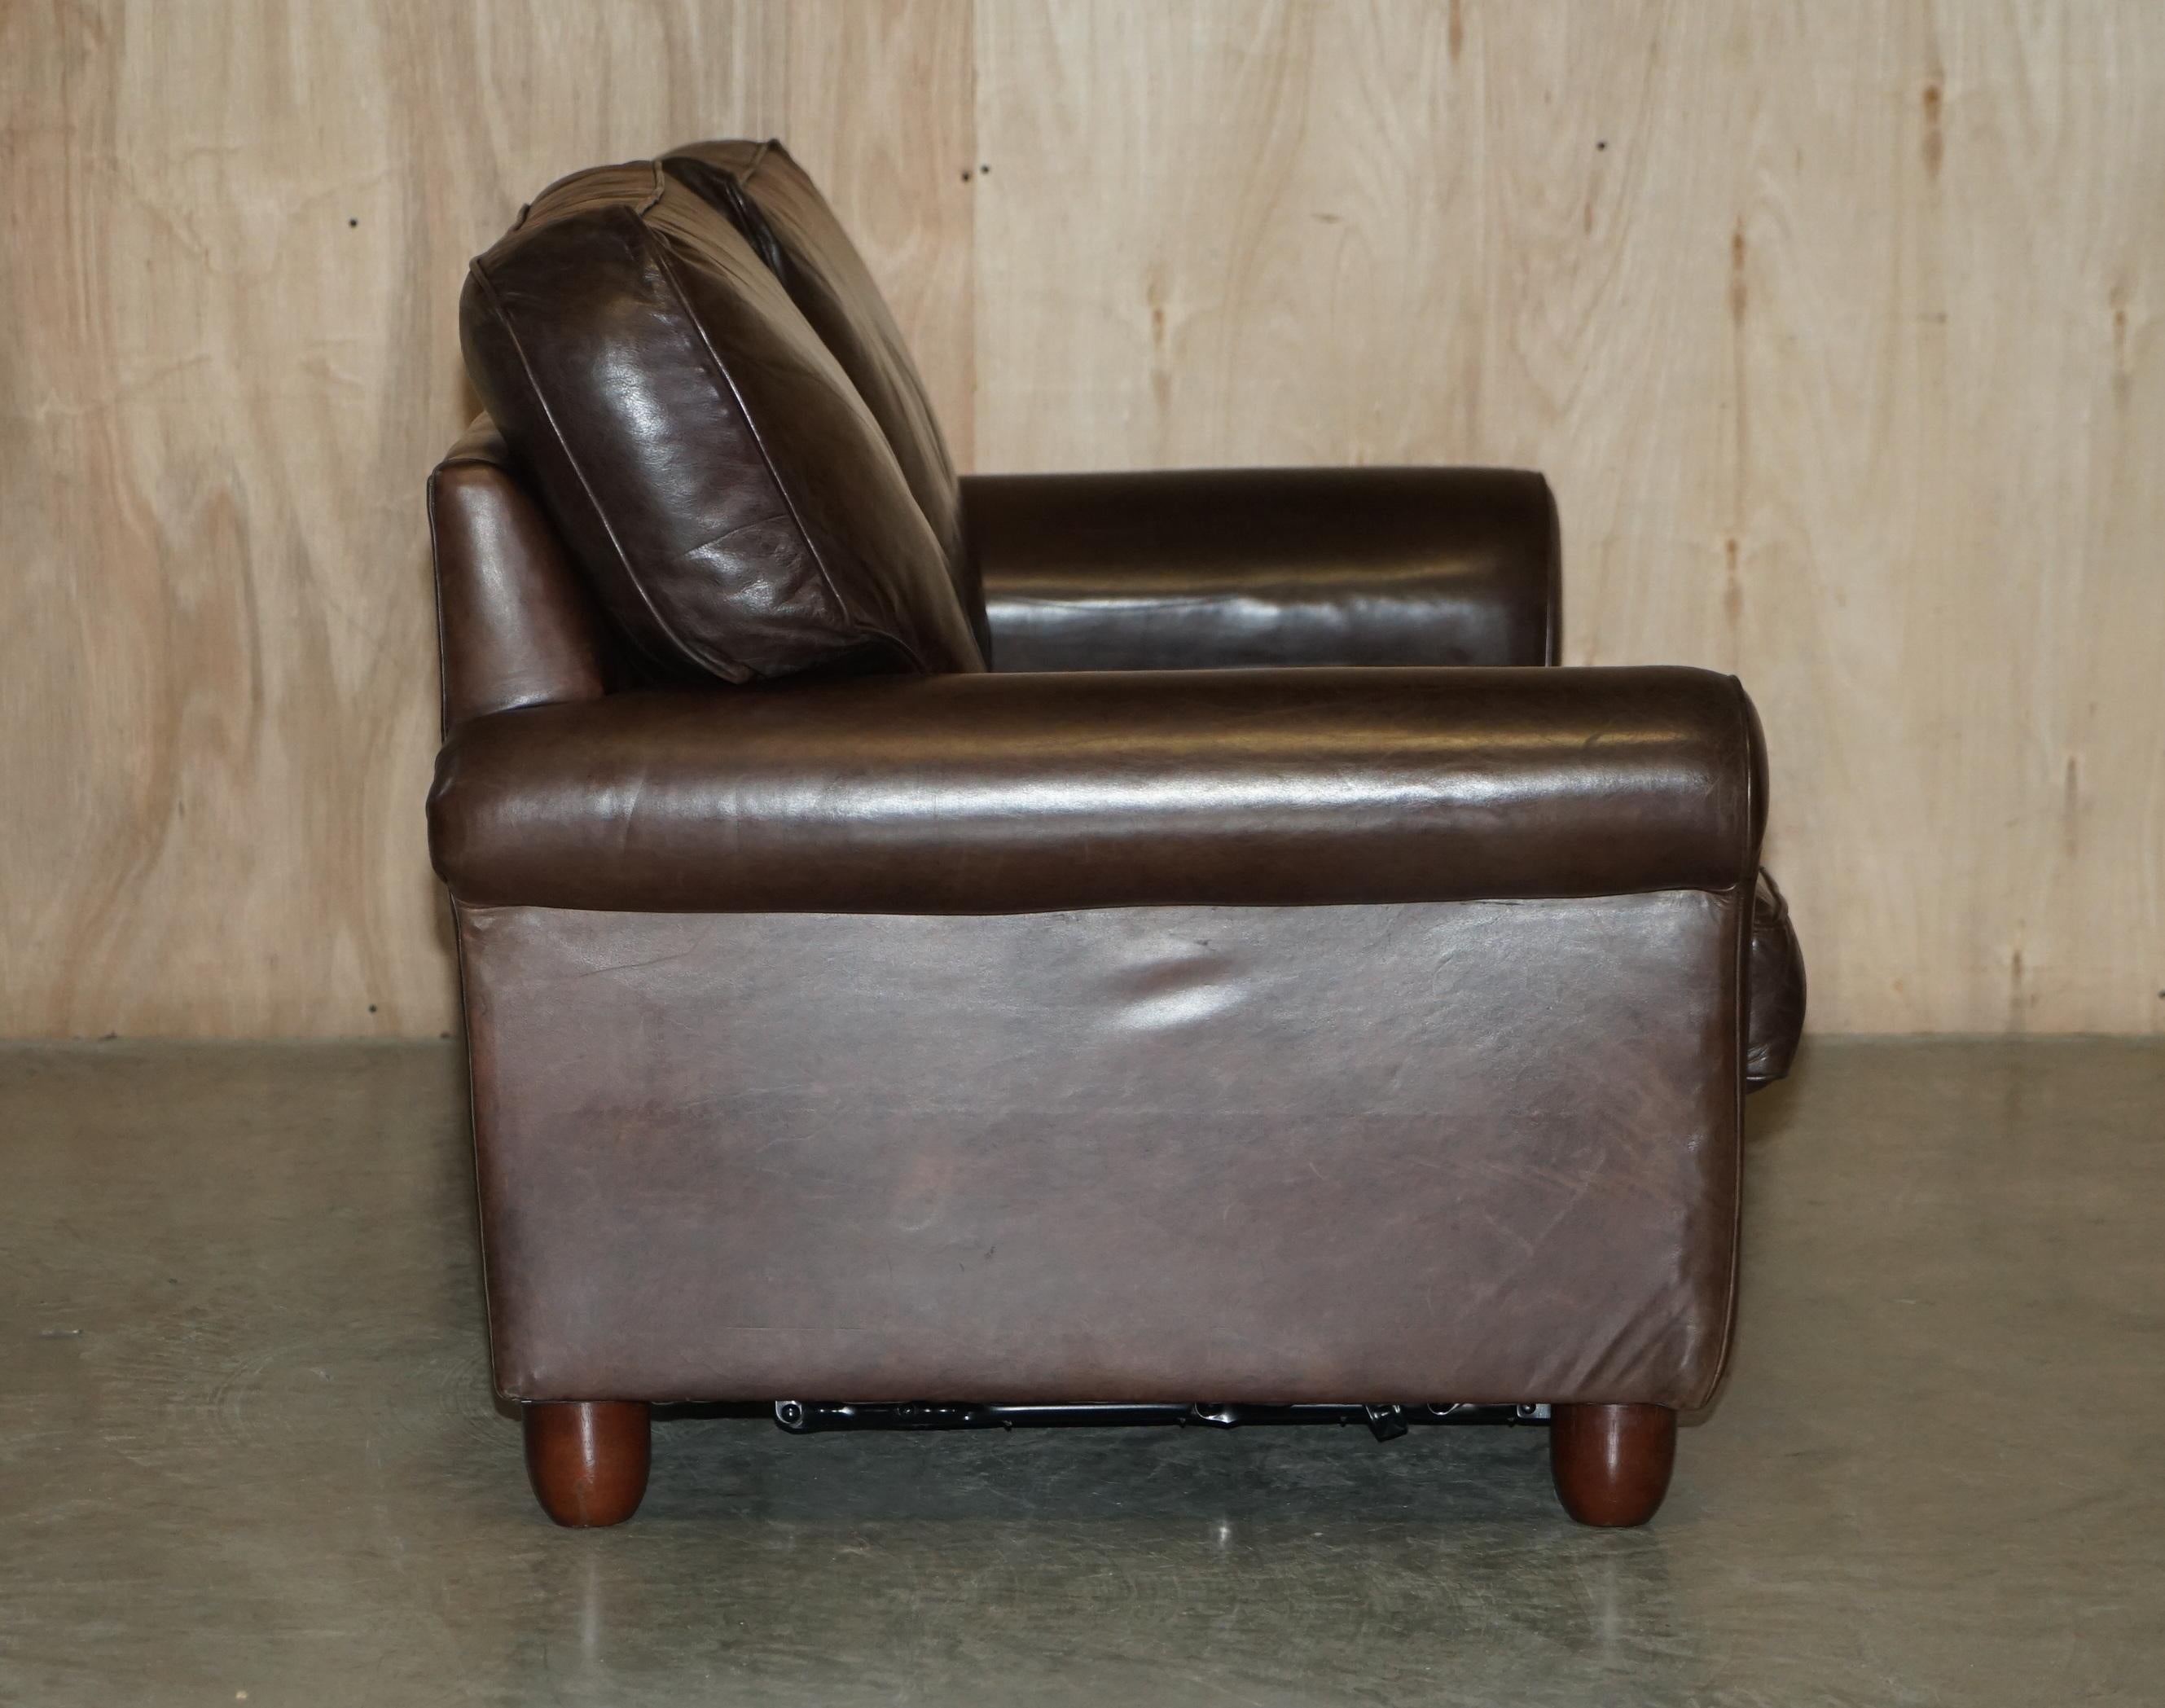 LOVELY HERITAGE BROWN LEATHER LAURA ASHLEY MORTIMER SOFABED IN SEHR GUTEM ZUSTAND im Angebot 4